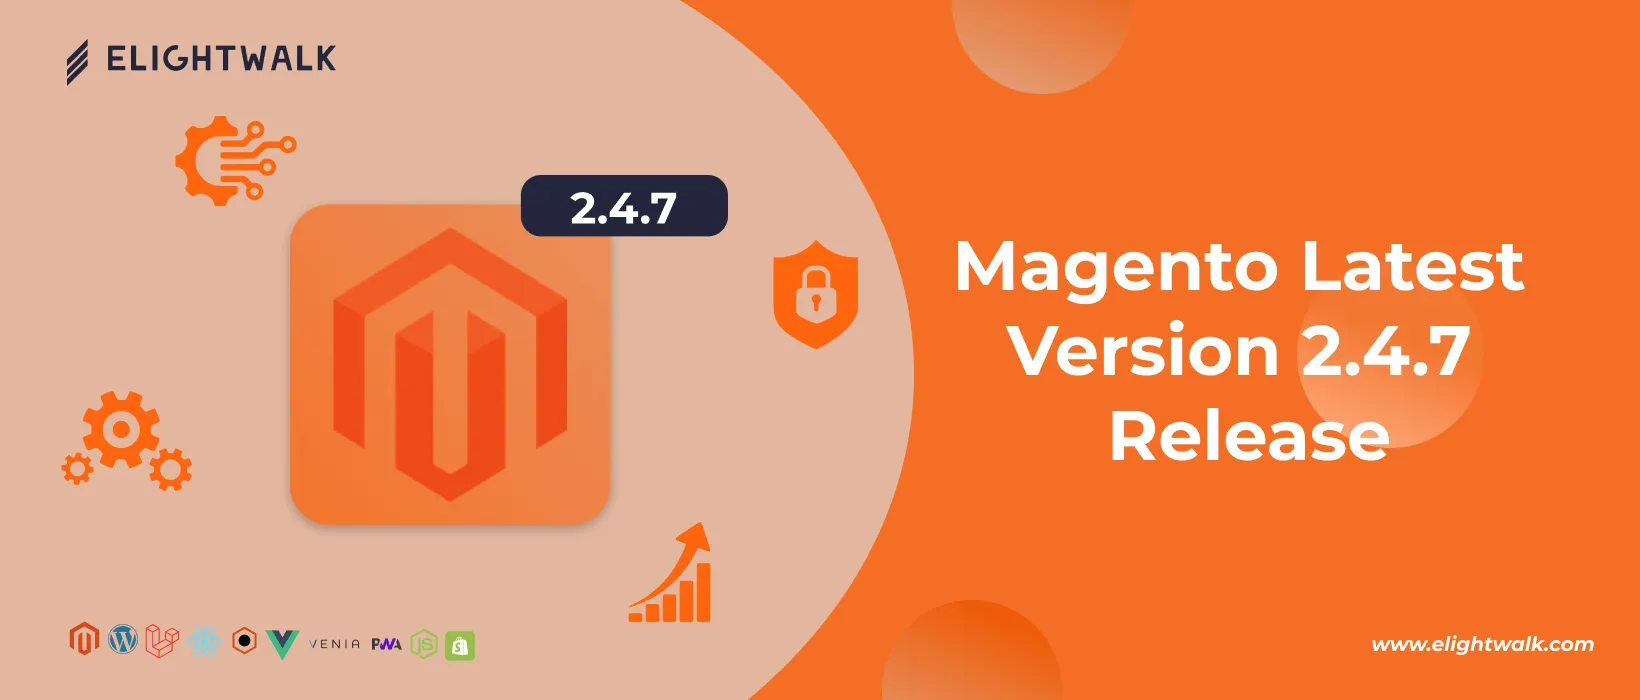 Latest Version released Magento 2.4.7